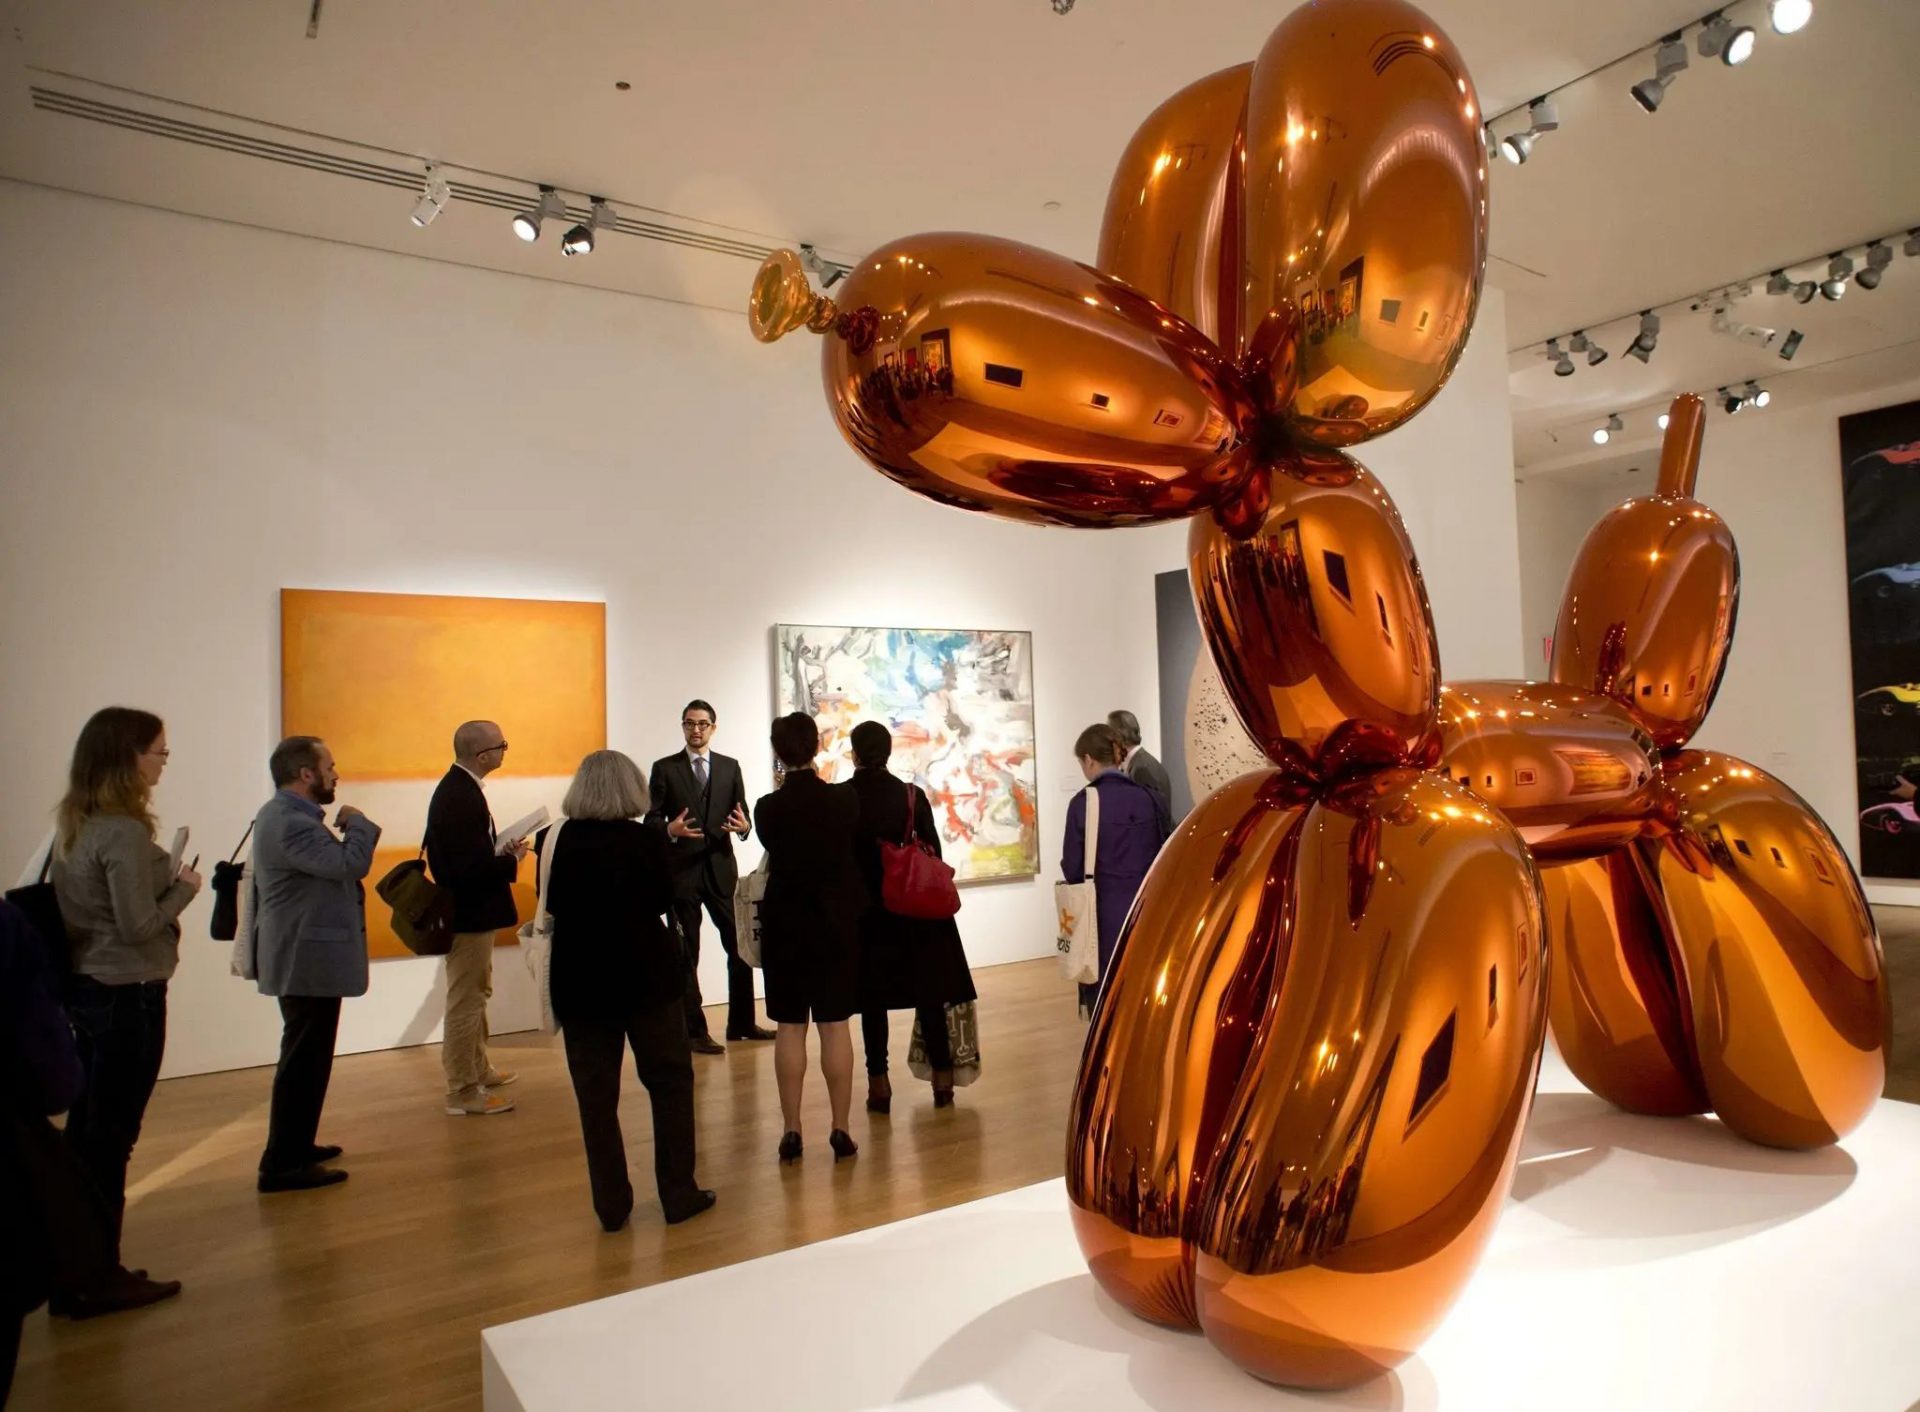 A photograph of an art gallery featuring a large orange sculpture in the shape of a ballon animal dog.